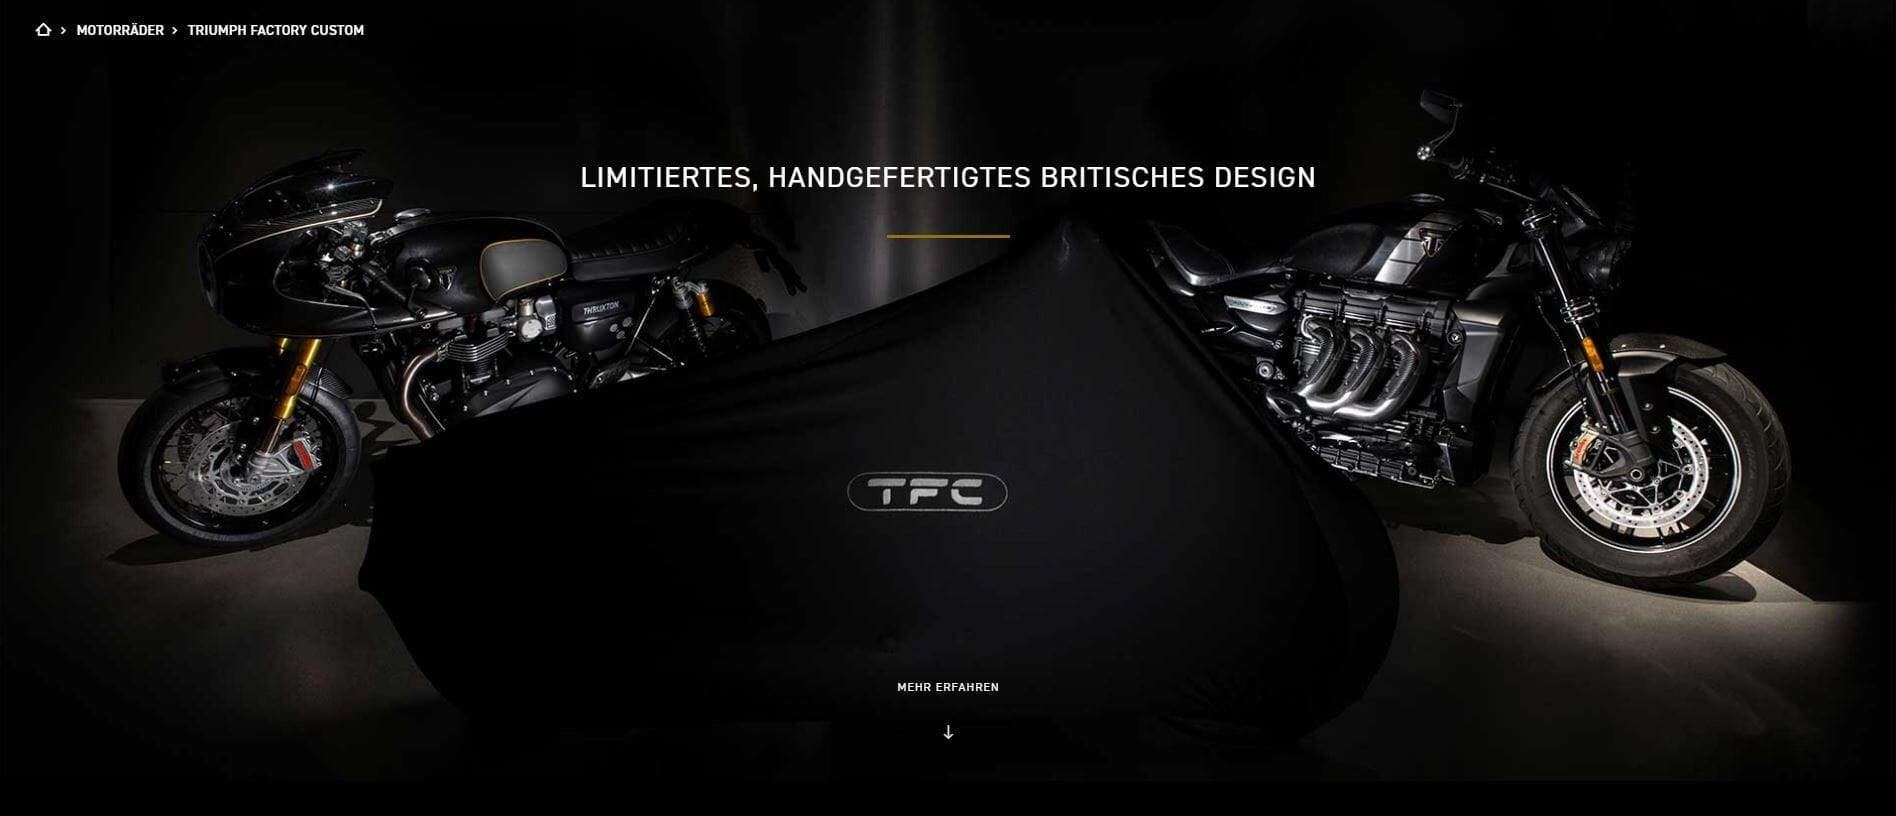 Third Triumph TFC motorcycle will be presented at the Eicma